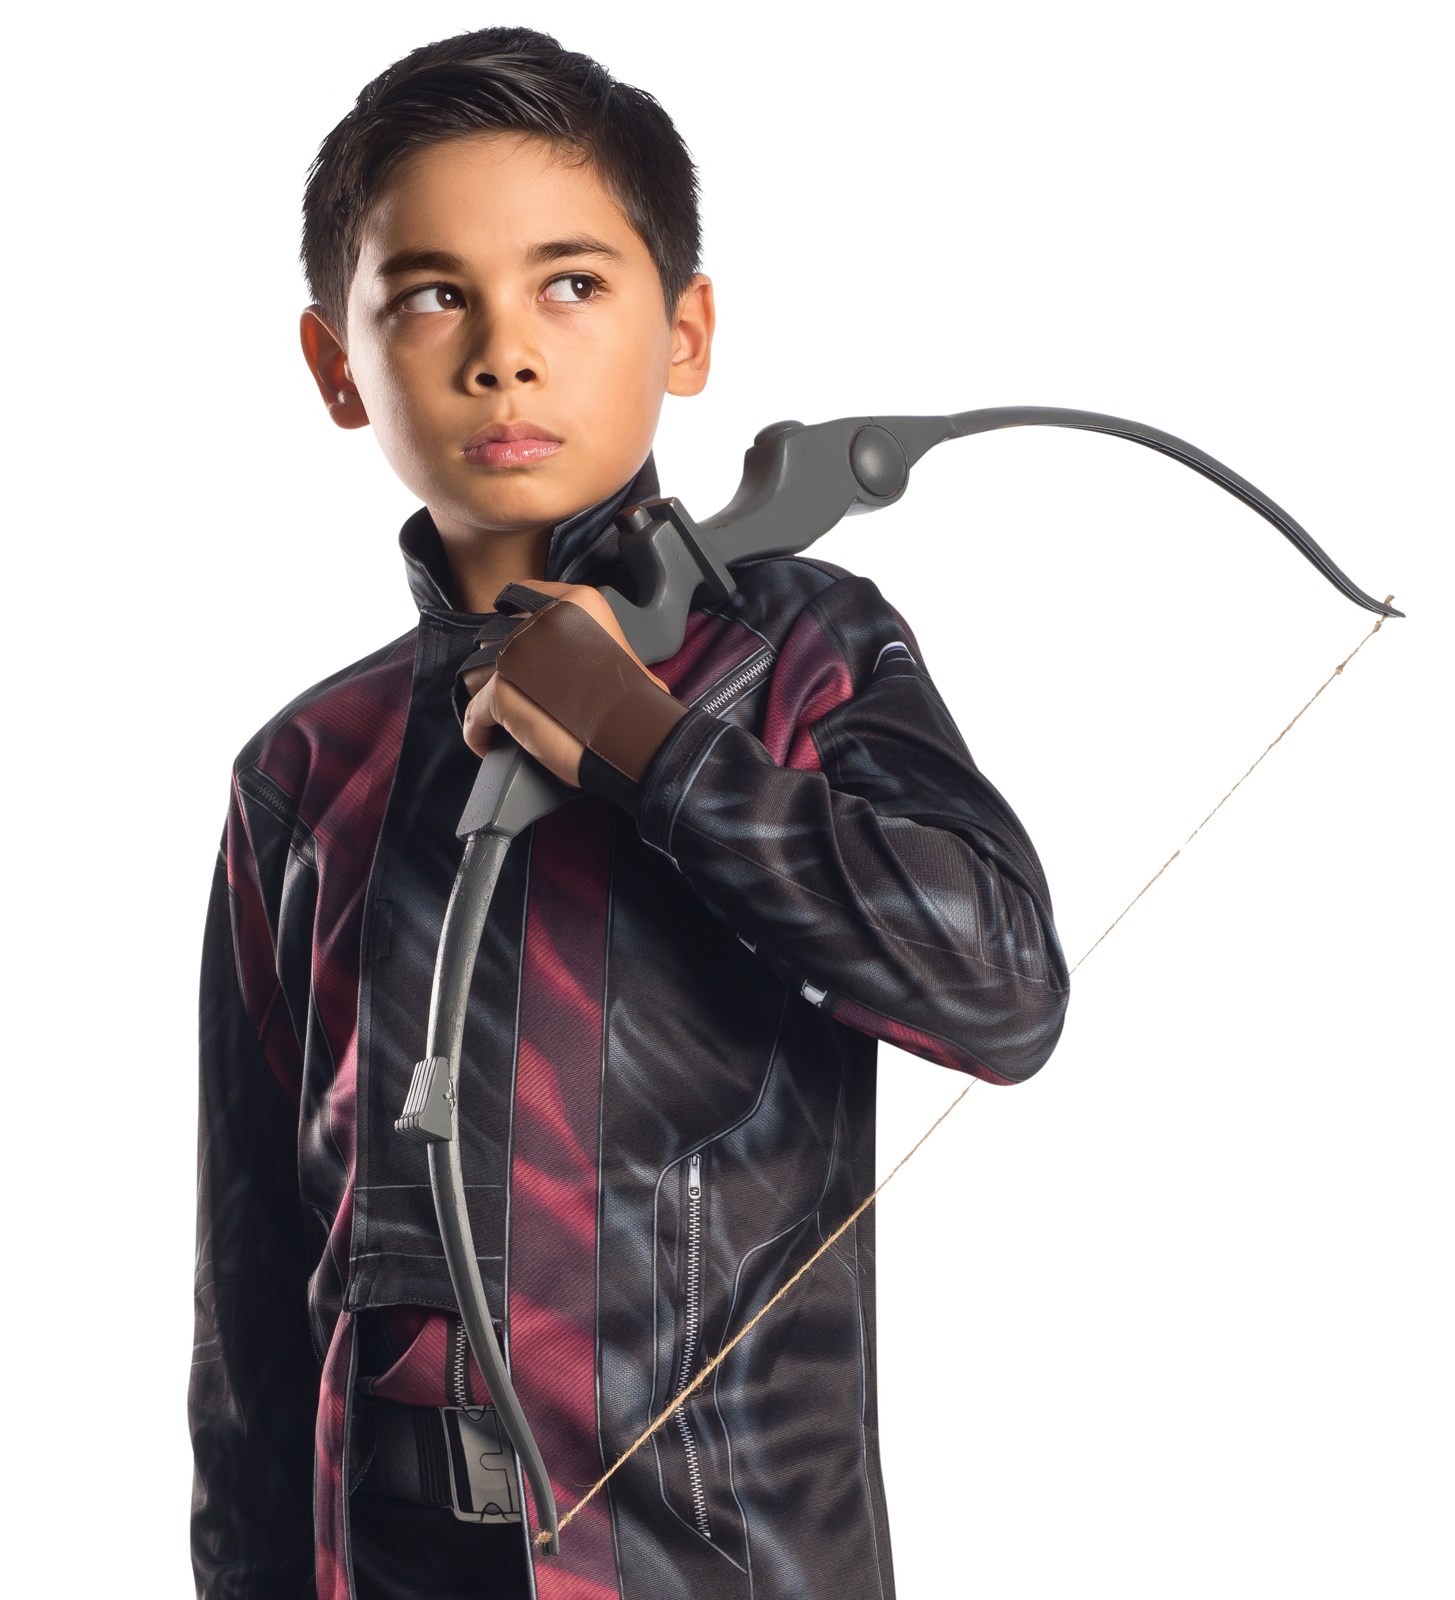 Avengers 2 - Age of Ultron: Hawkeye Bow and Arrow